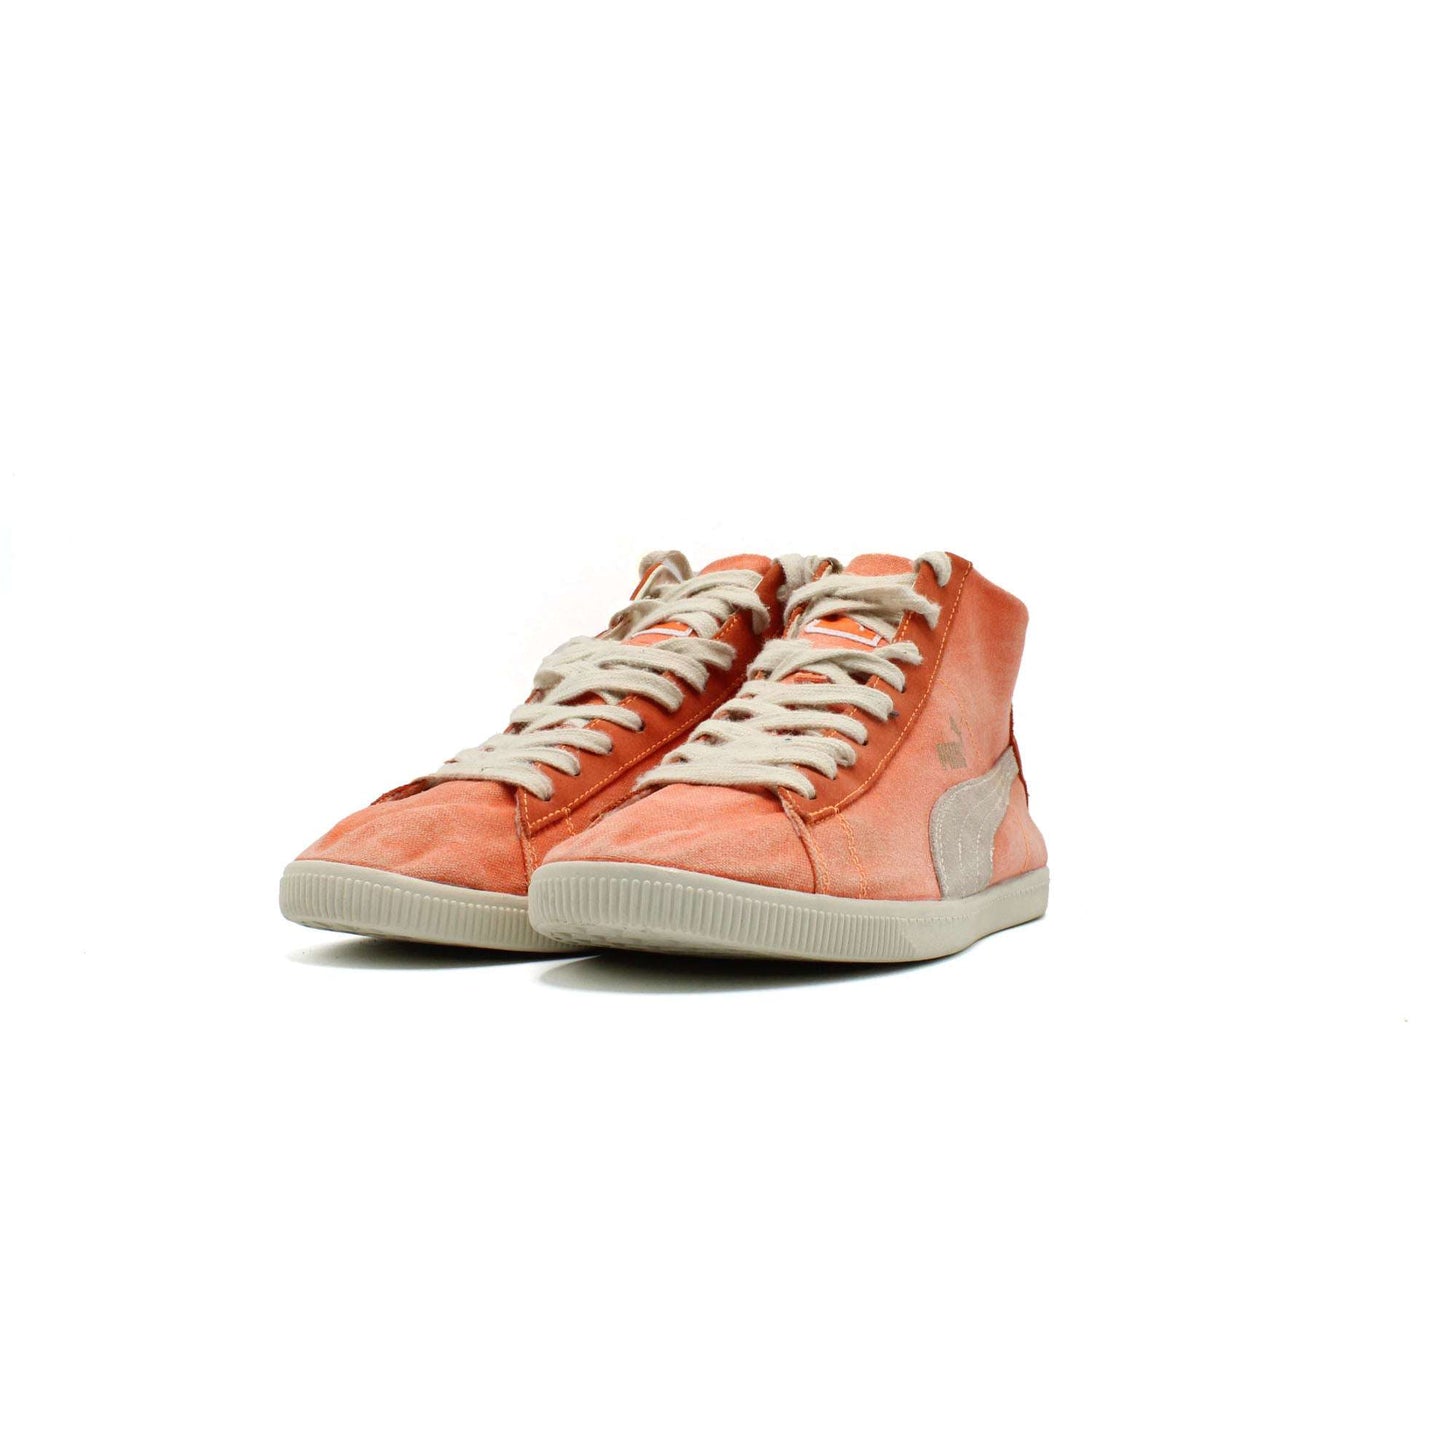 Puma Glyde Canvas Washed Mid High Top Shoe